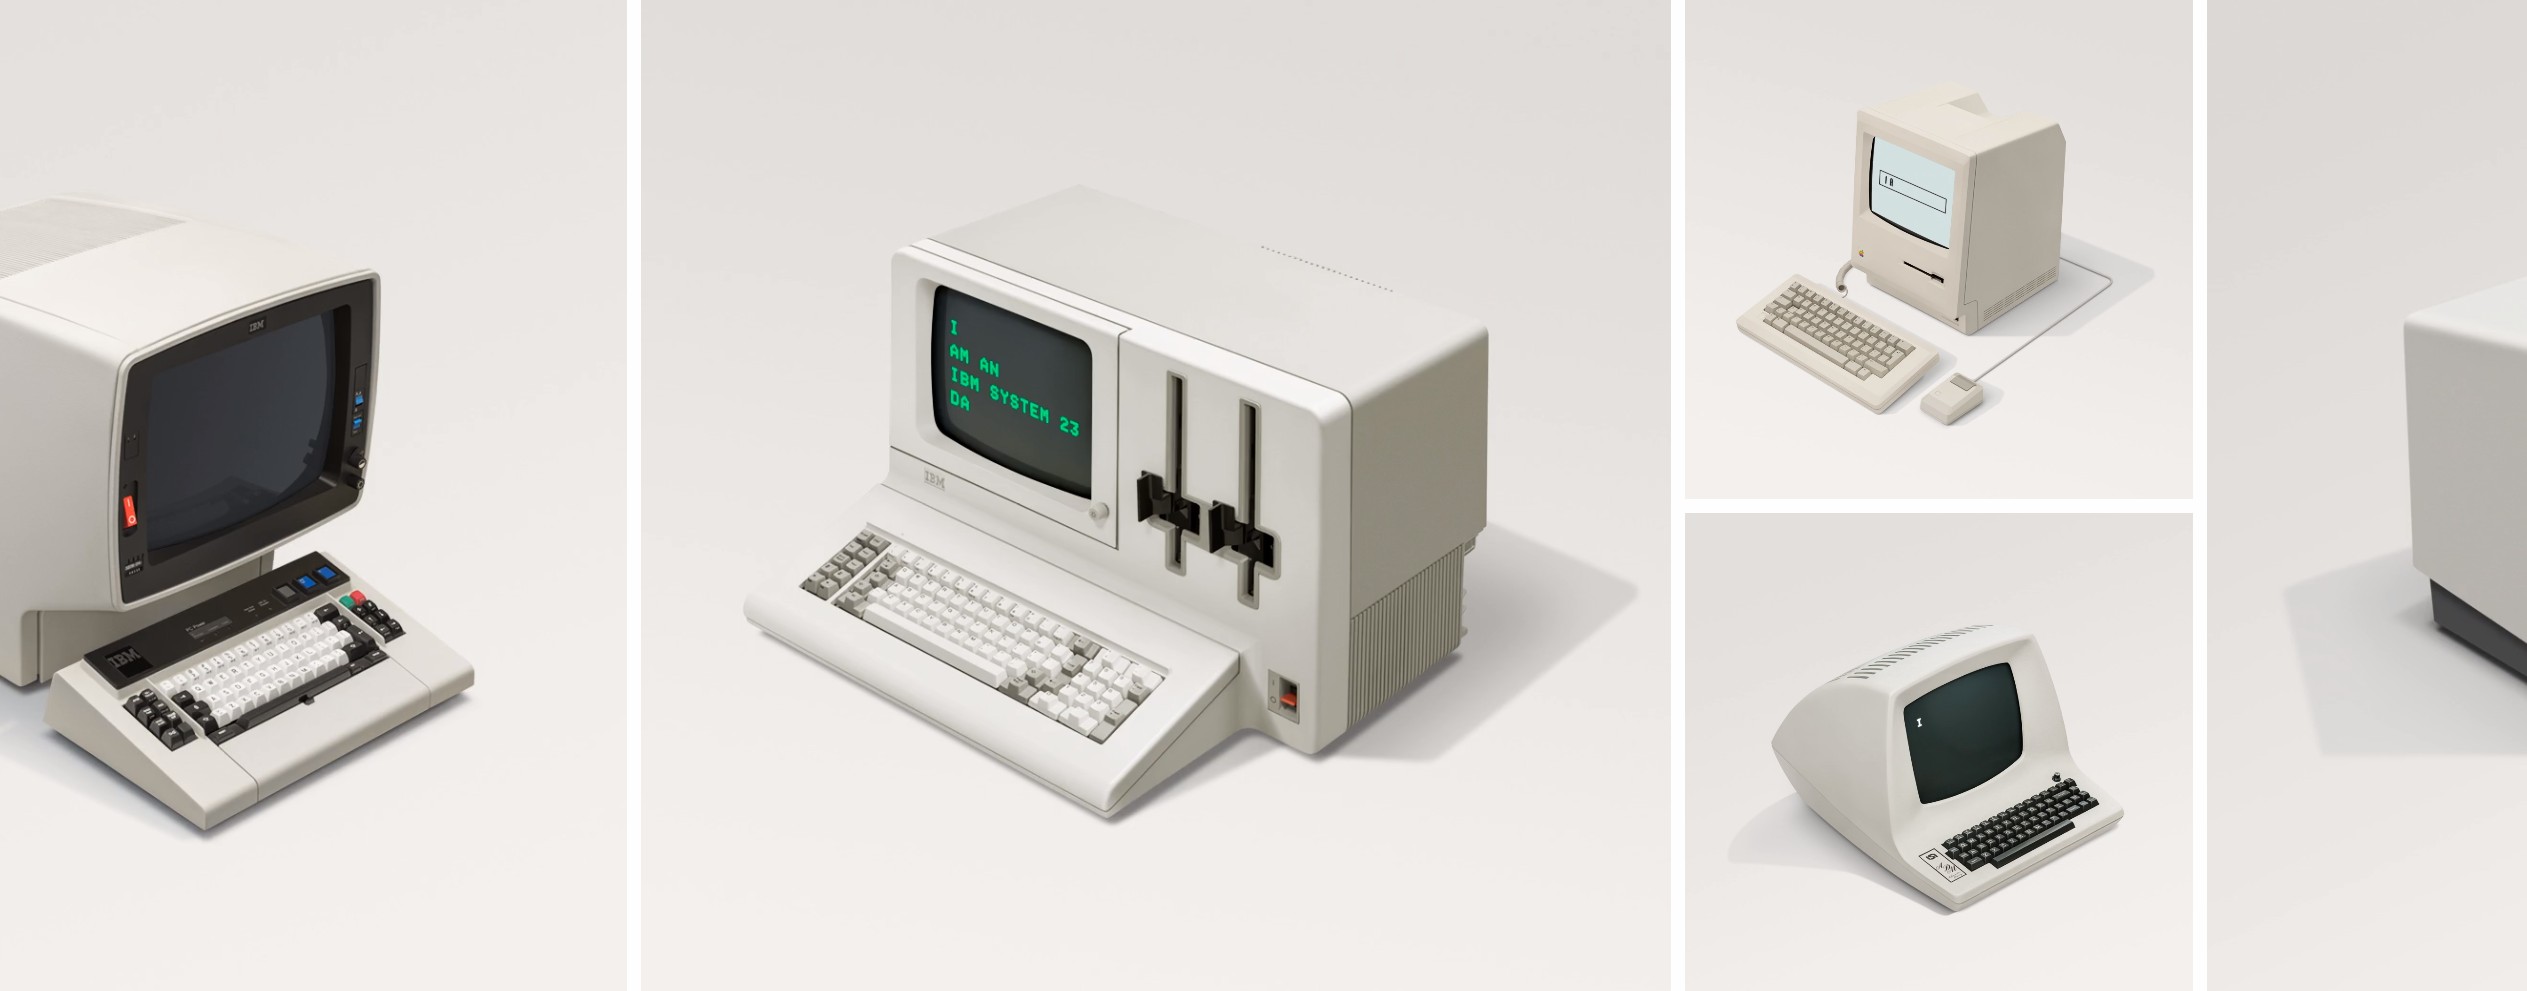 Designing the world's first home computers